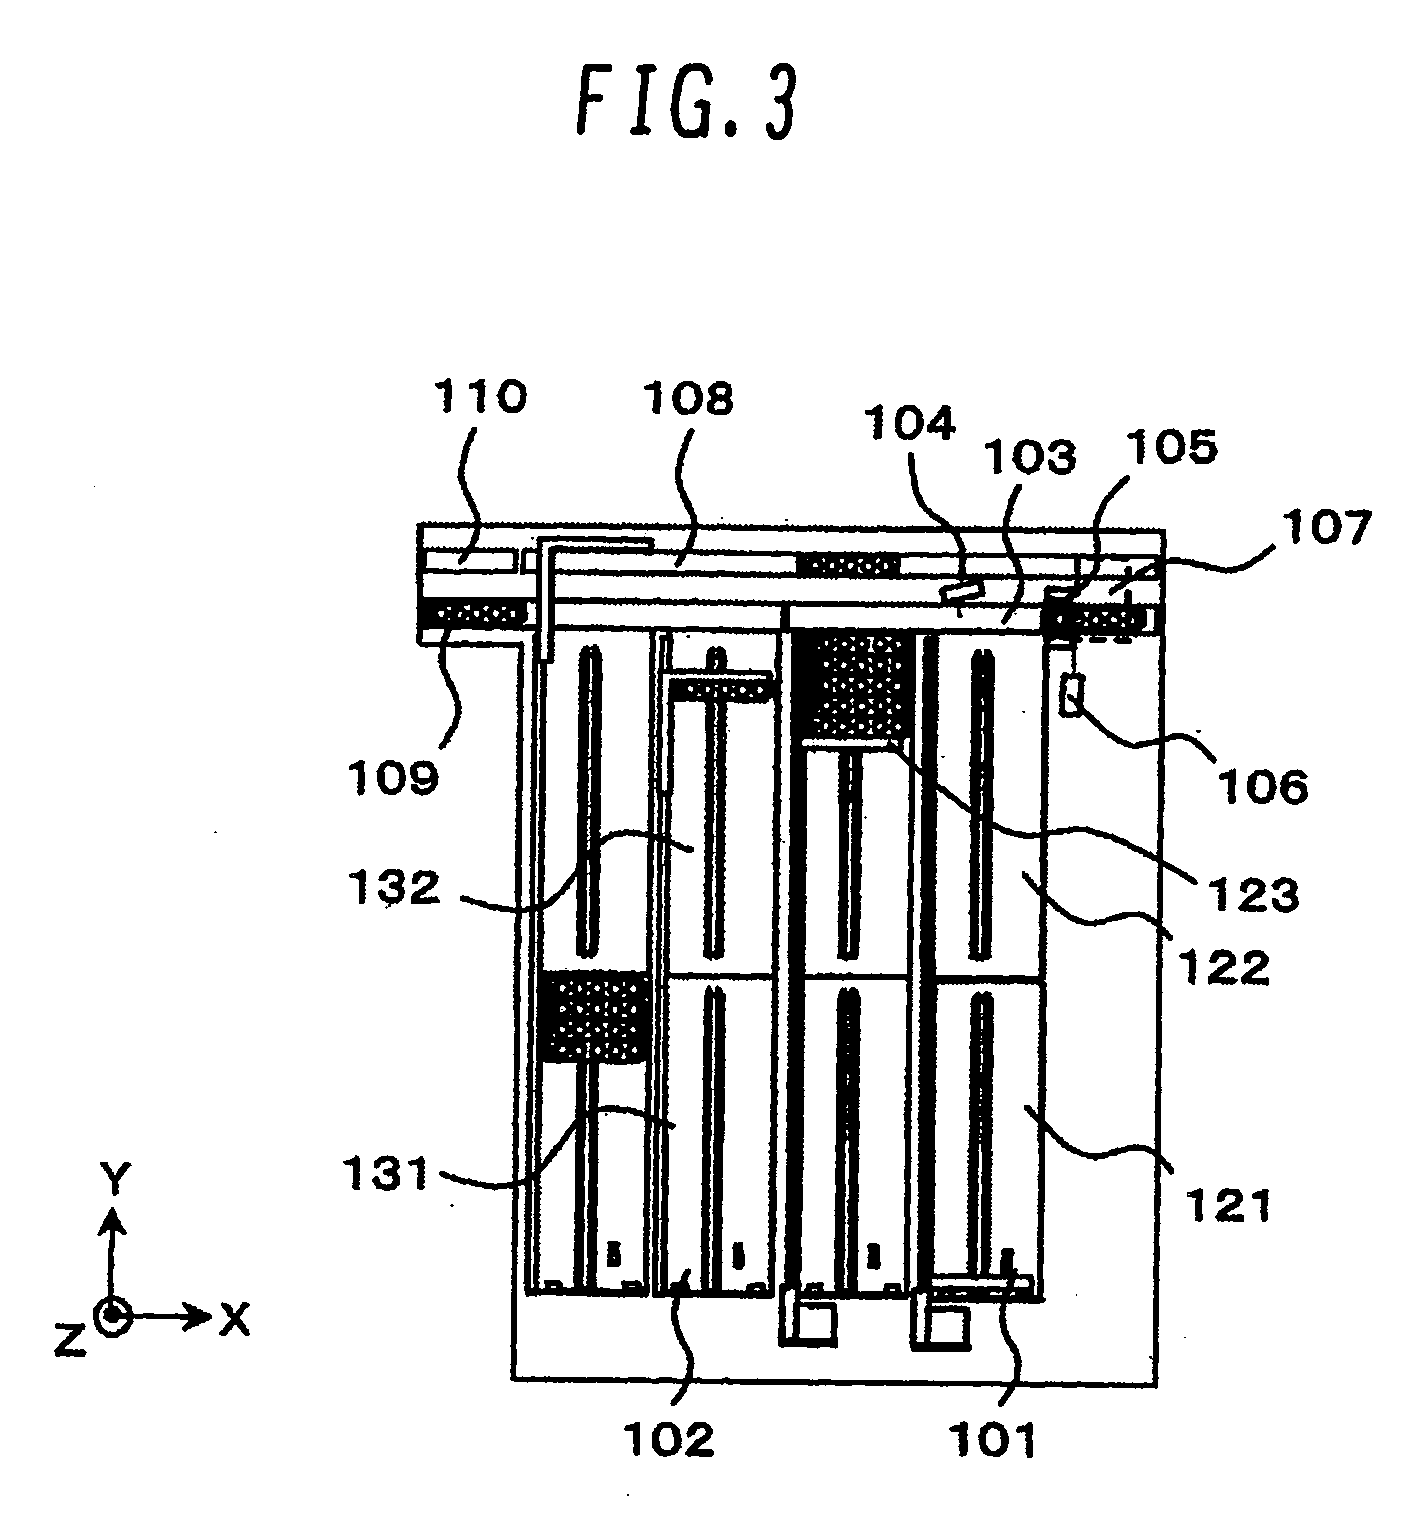 Automatic analyzer and sample-processing system